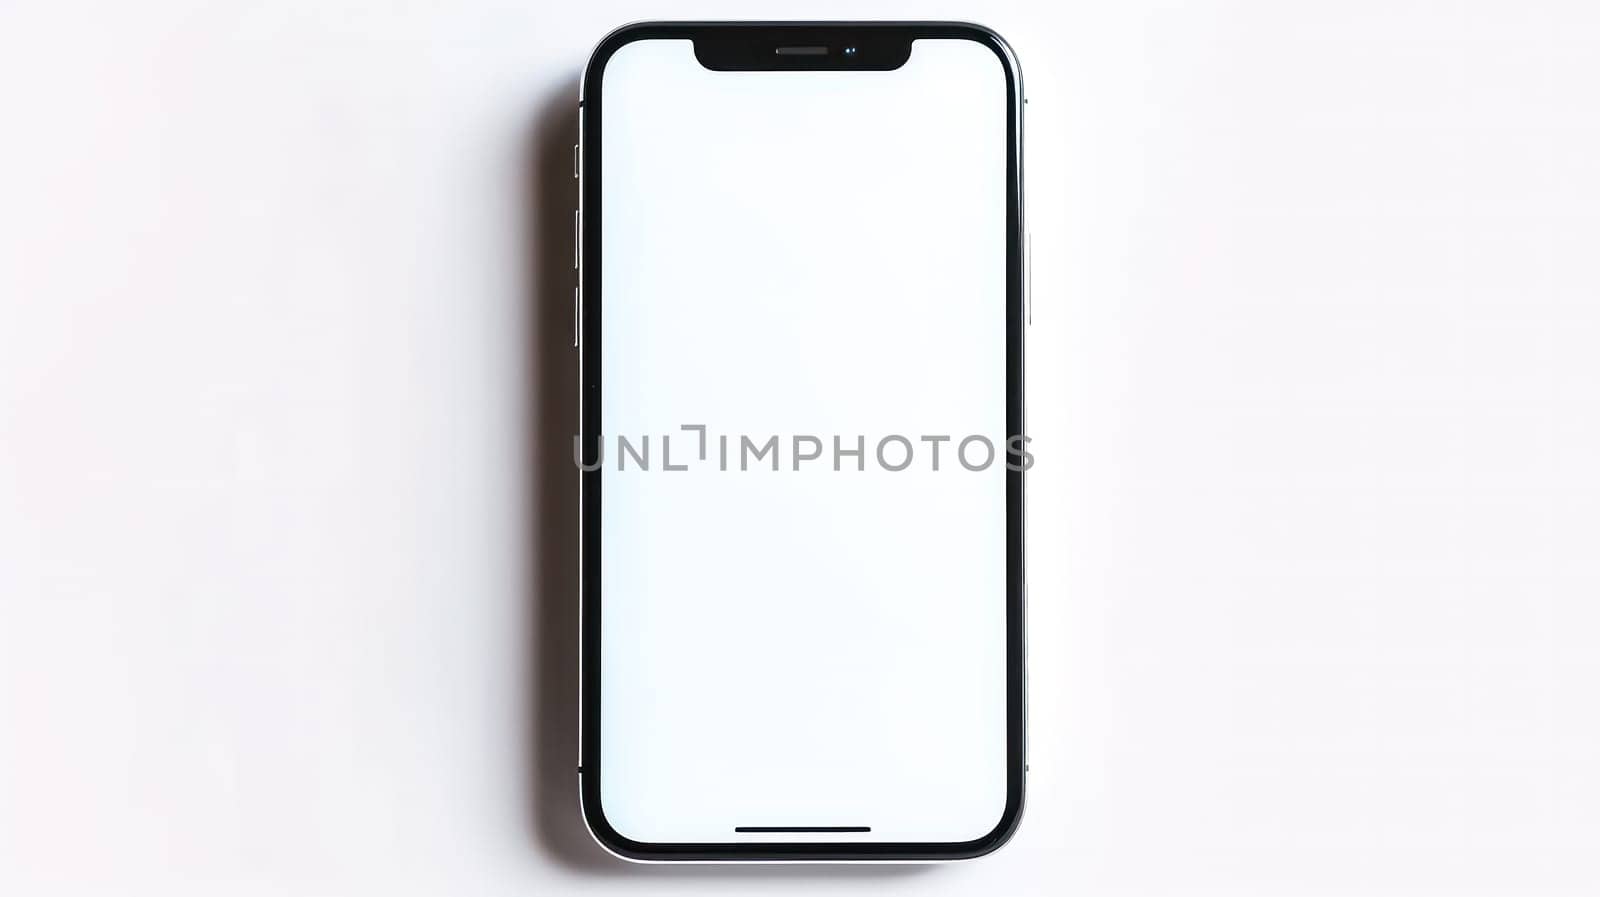 Mockup of a phone with a blank white screen, perfect for showcasing app designs, website layouts, or digital content in a professional manner.